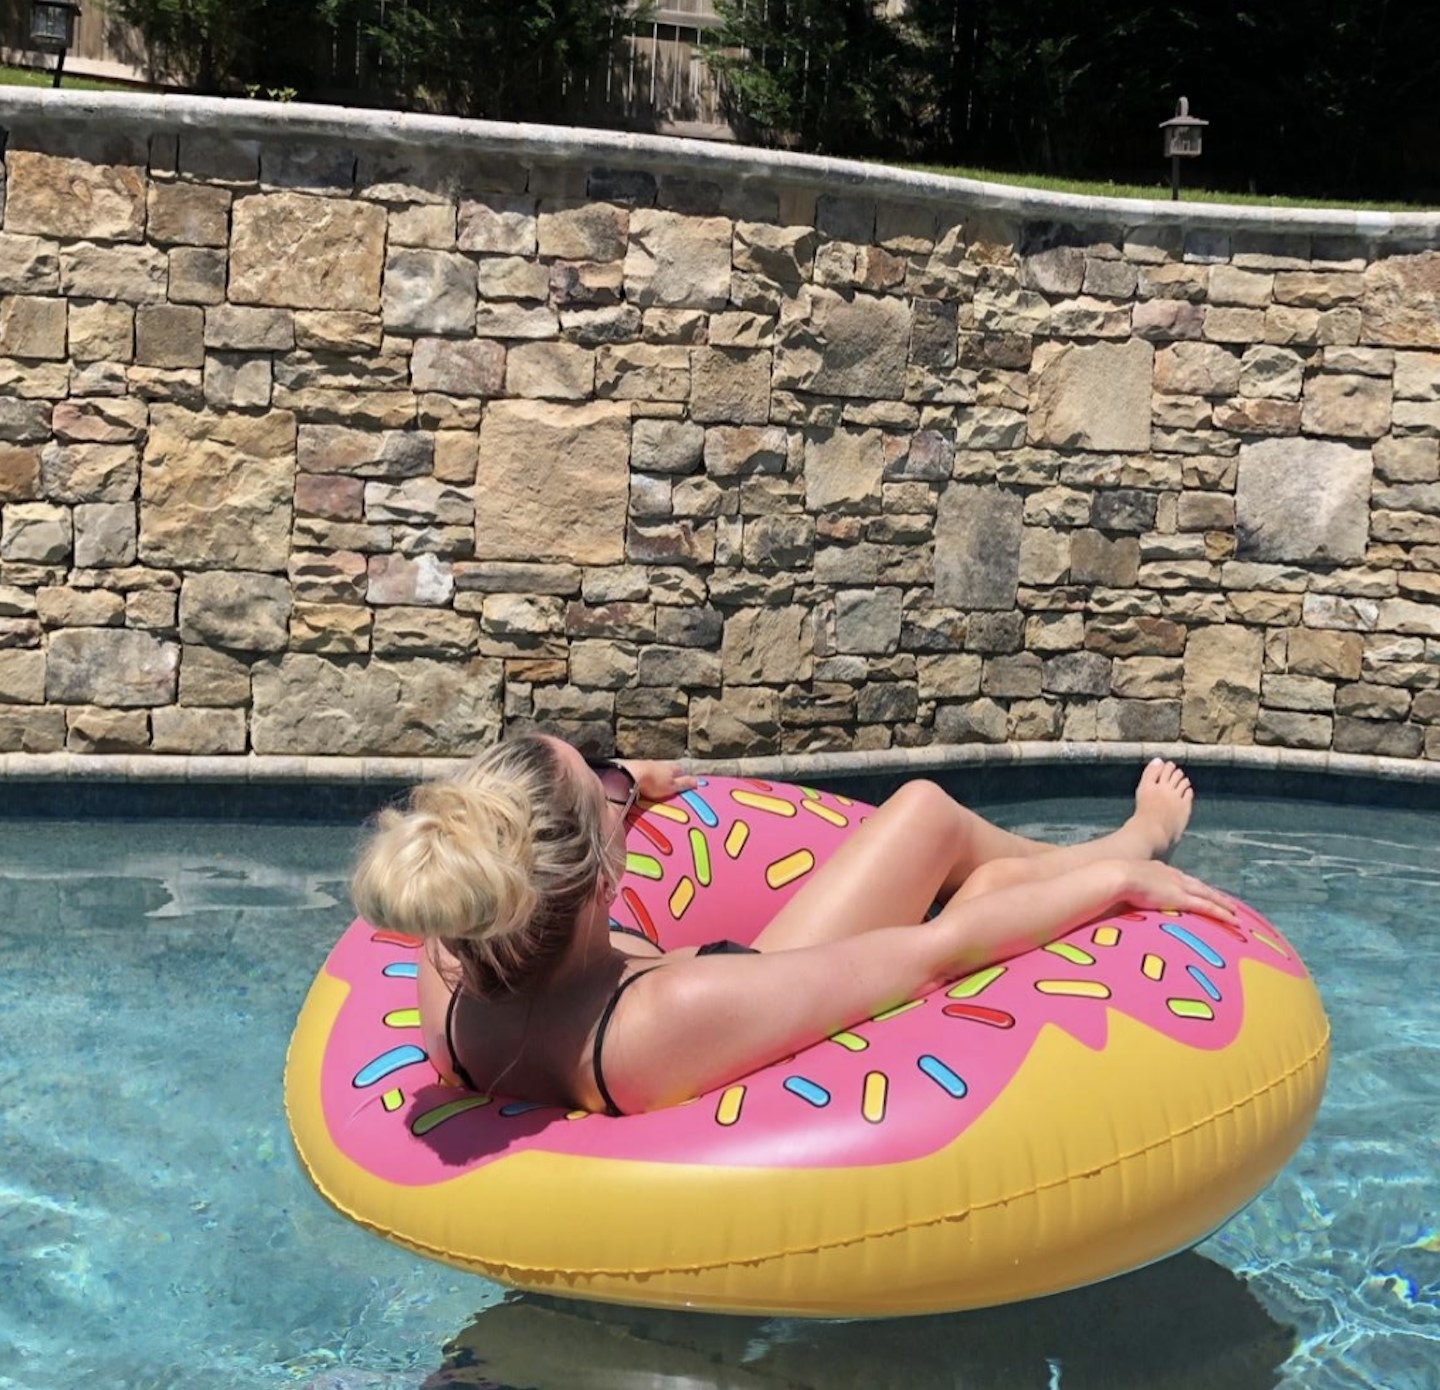 A person on a donut-shaped pool float